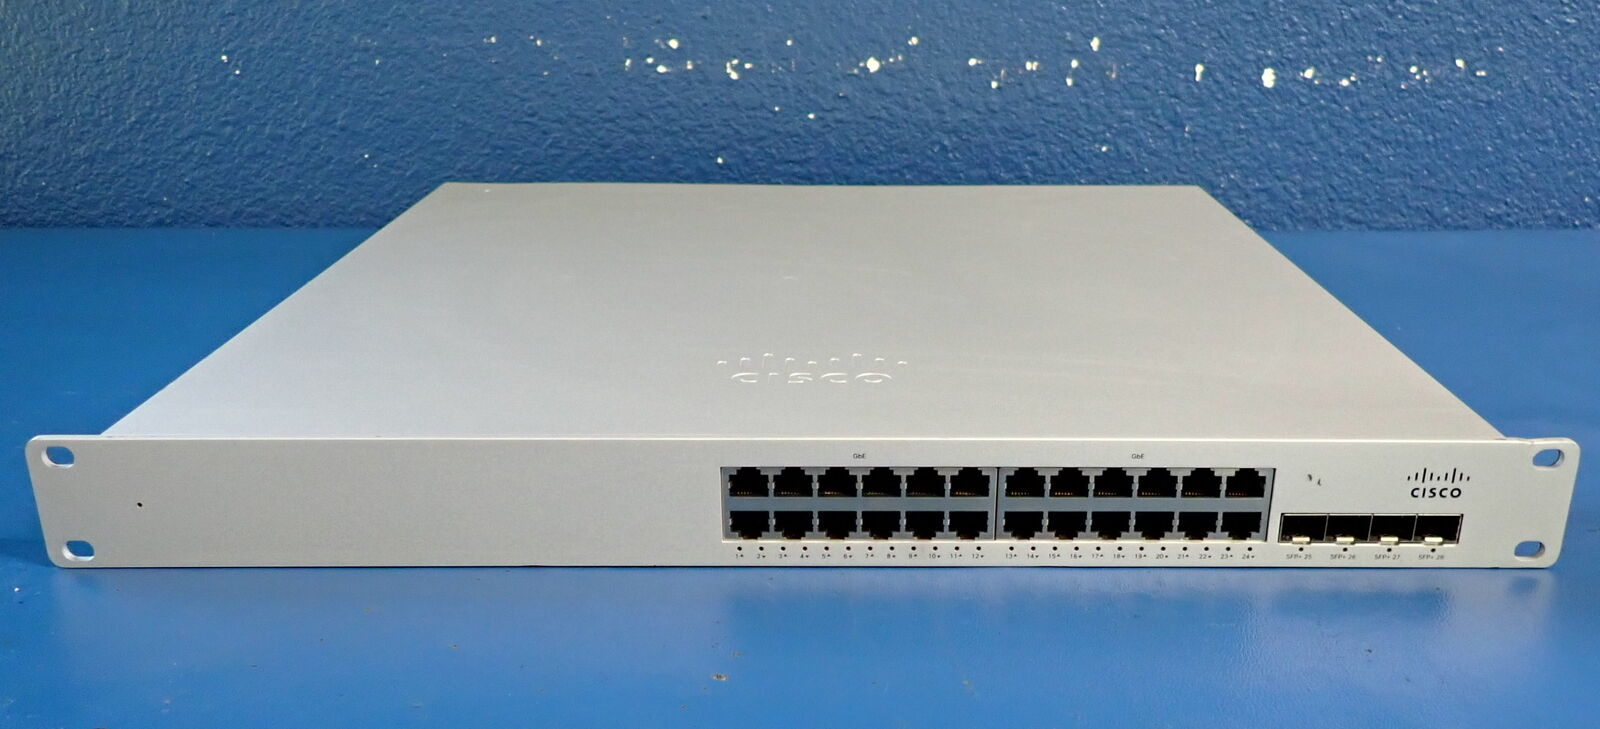 Cisco Meraki MS350-24 Ethernet Switch | Unclaimed, Not Affected by Clock Issue